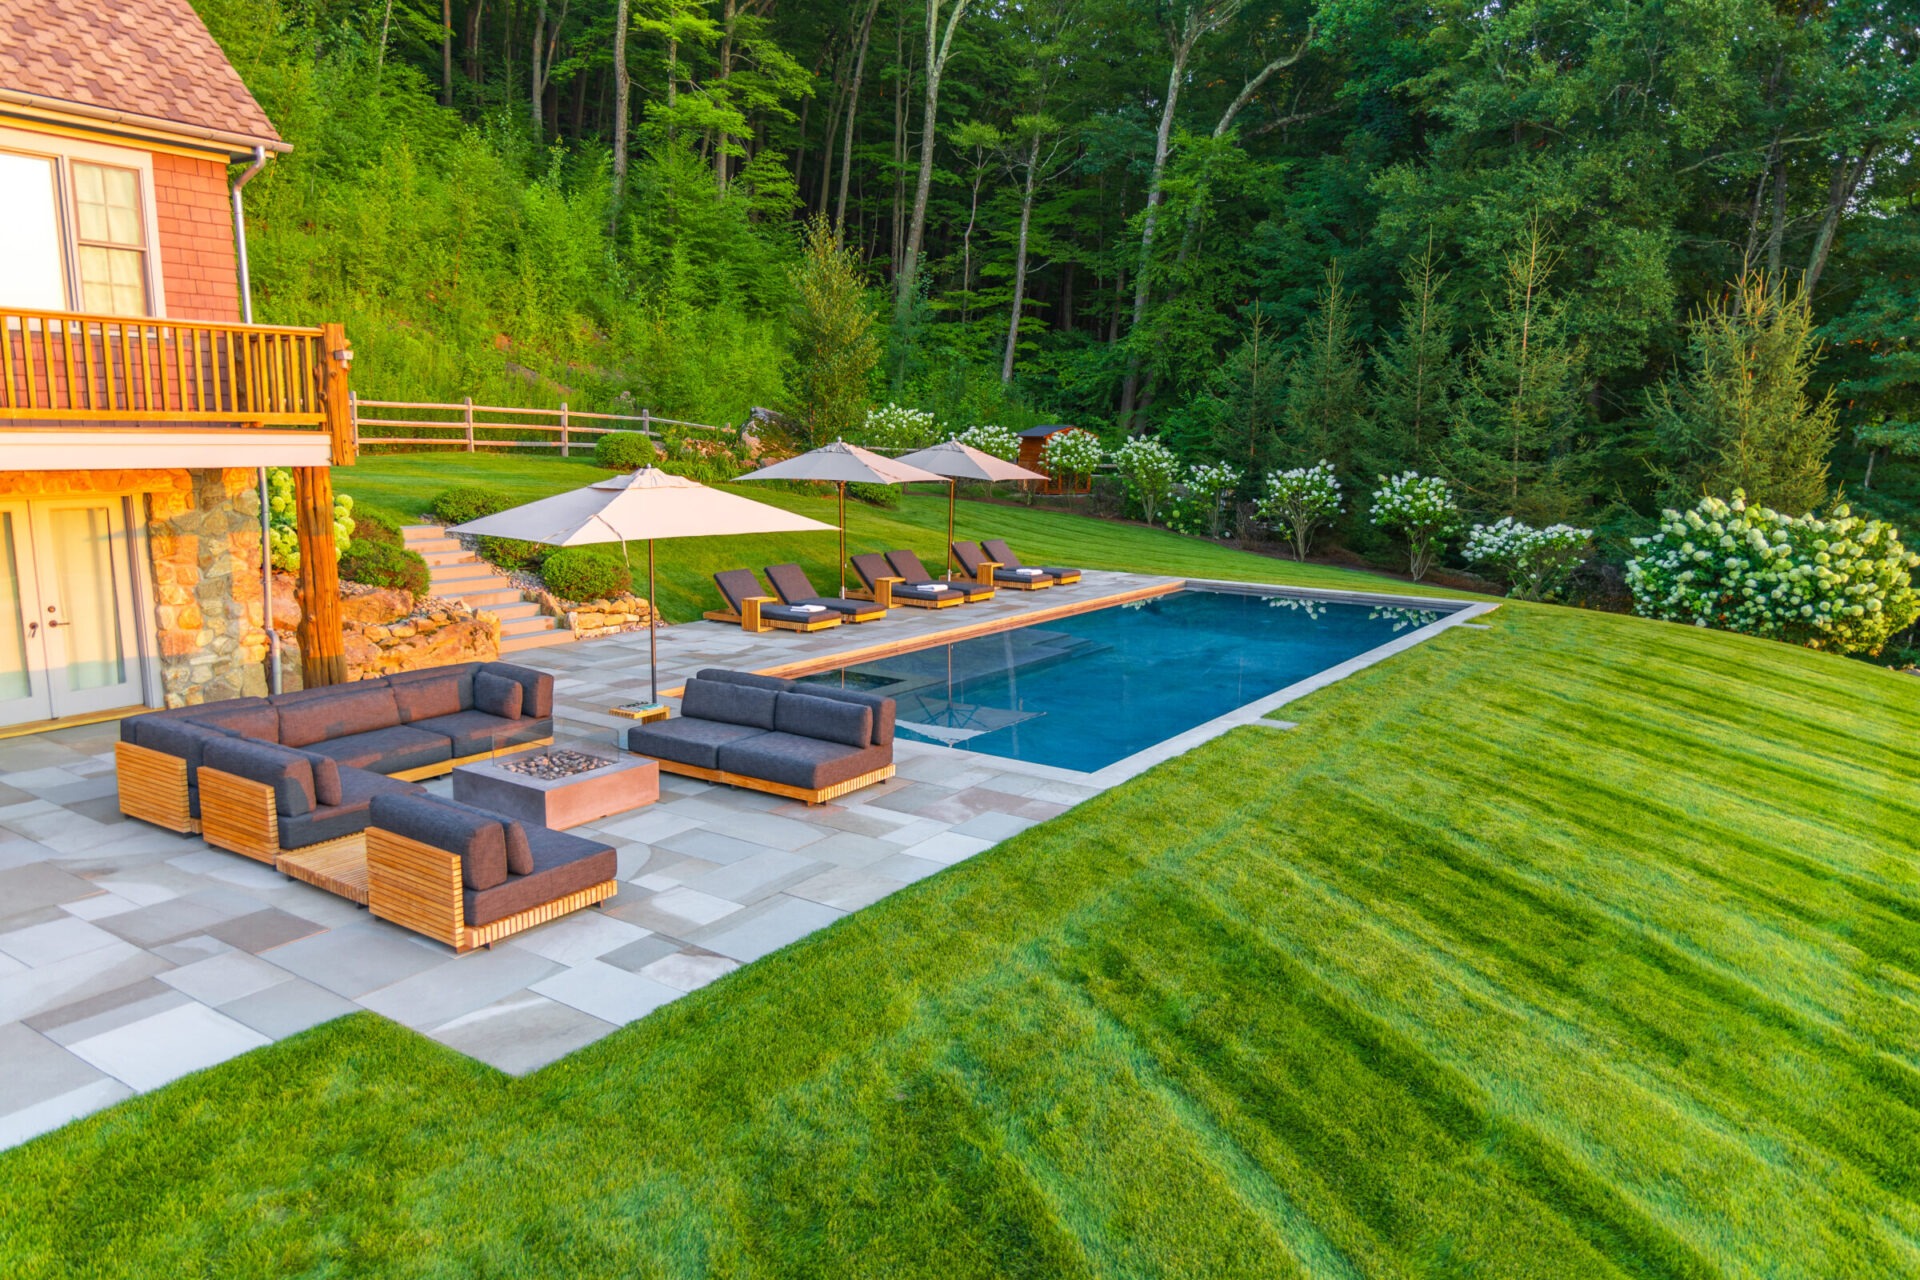 A luxurious backyard with an in-ground pool, trimmed lawn, patio furniture, and large umbrellas adjacent to a house with a wooded backdrop.